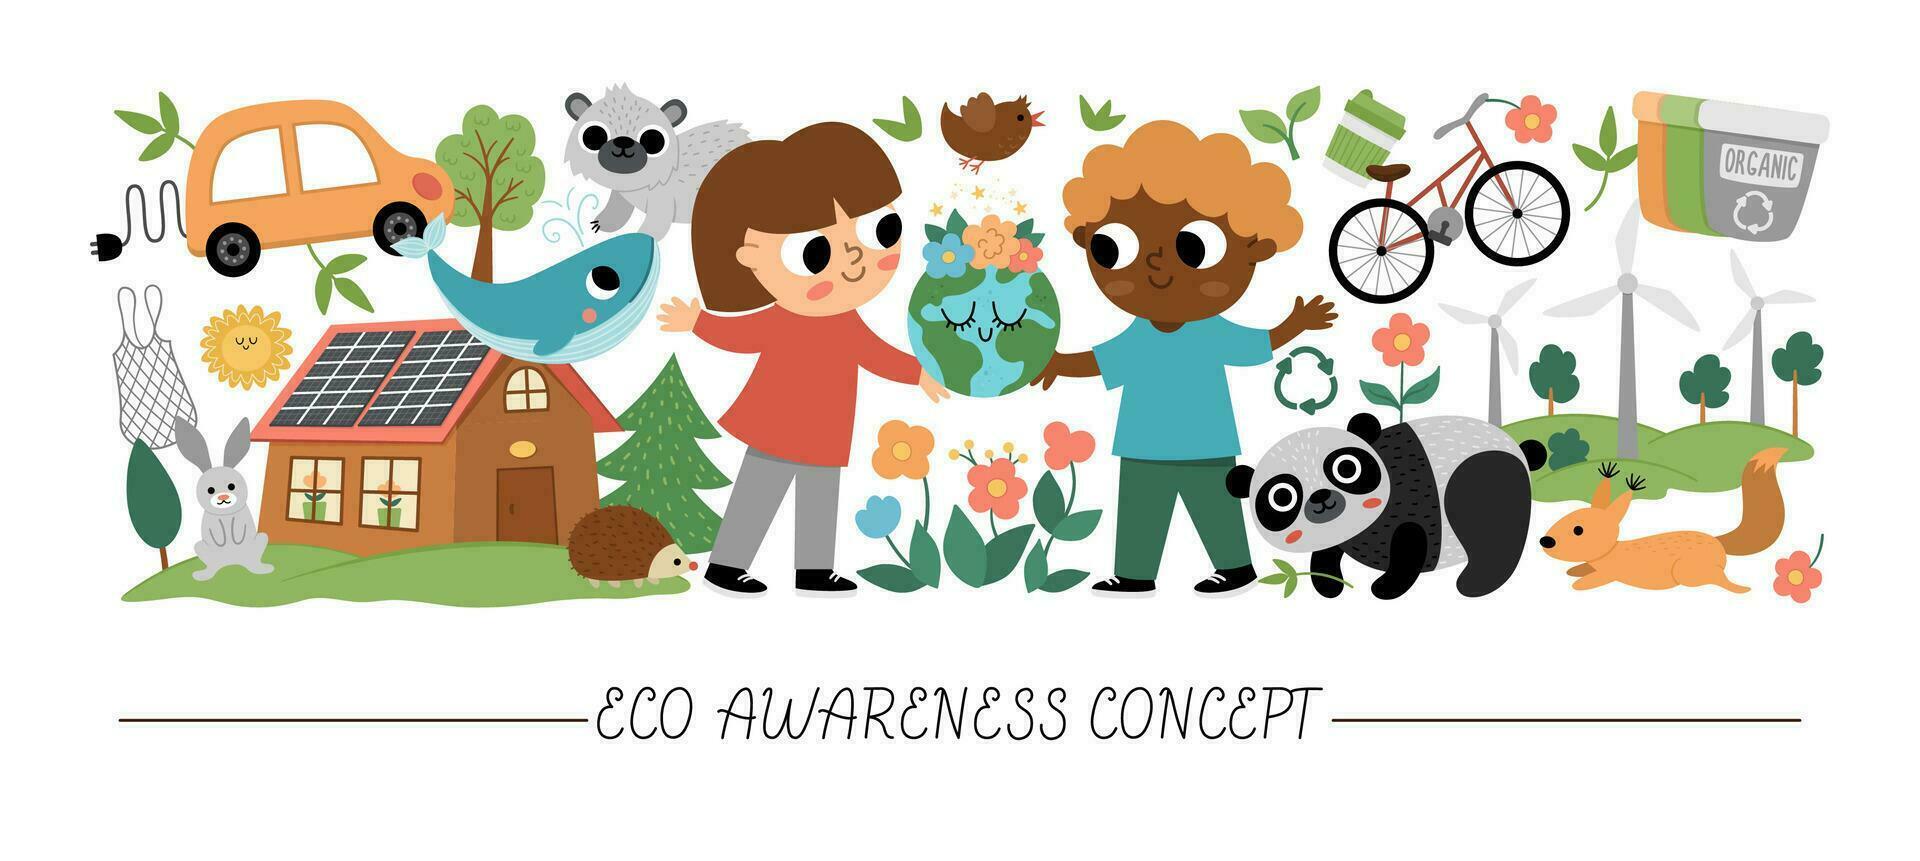 Vector ecological horizontal set with cute children caring of nature. Earth day card template for banners, invitations. Cute environment friendly illustration with planet, waste recycling concept